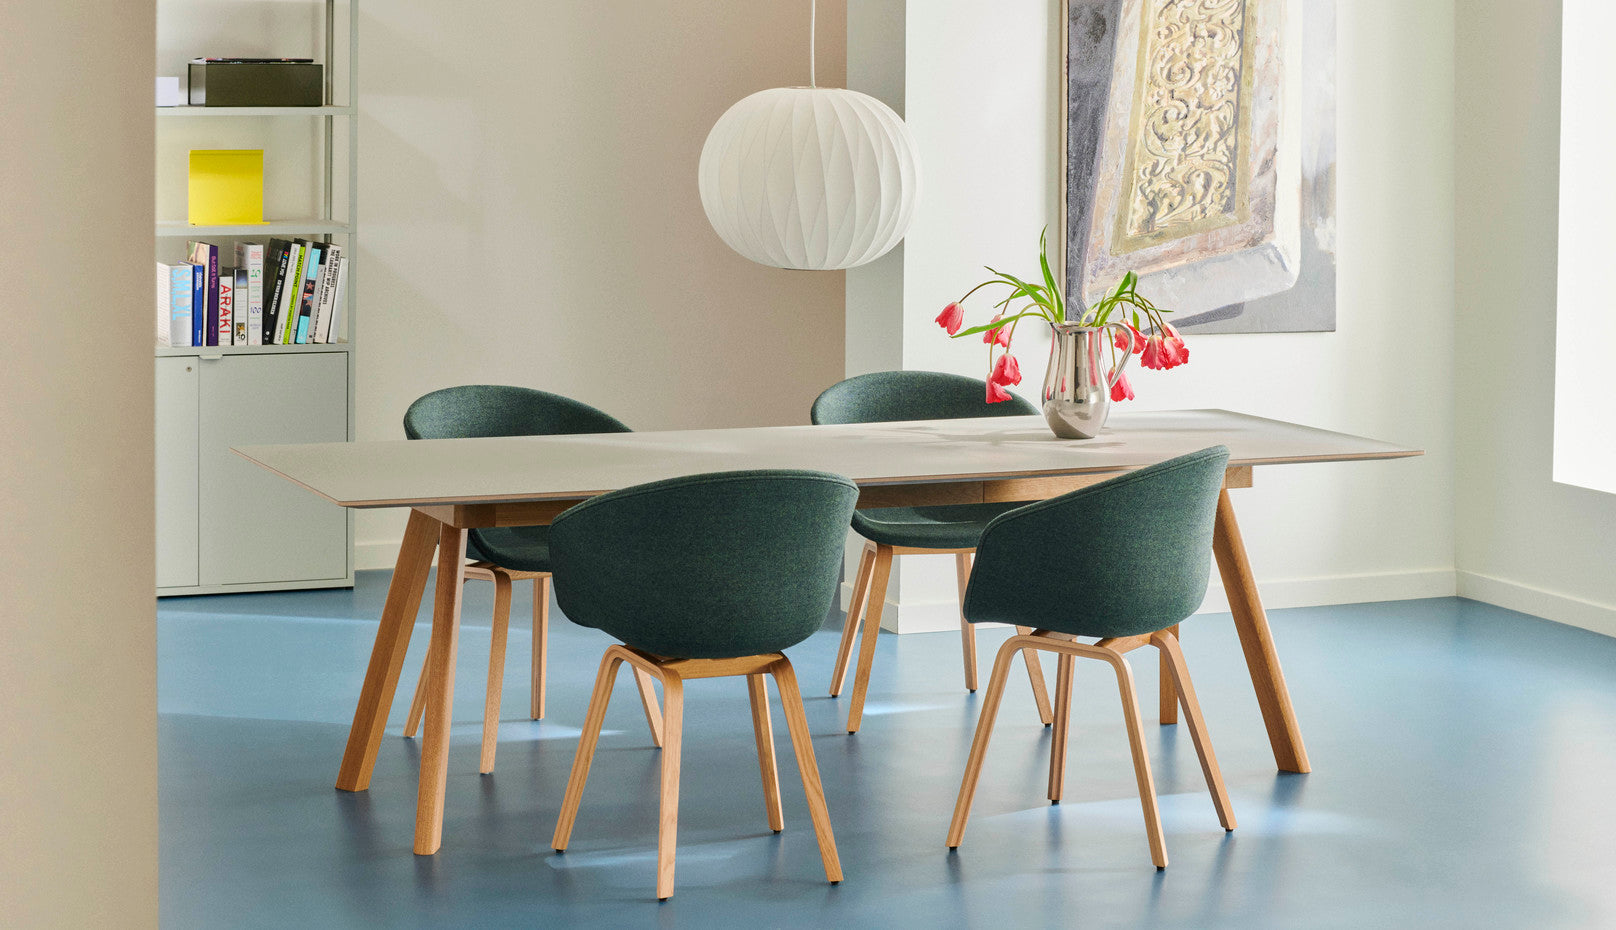 Autumn Dining & Office Sale - 20% Off Selected HAY Furniture